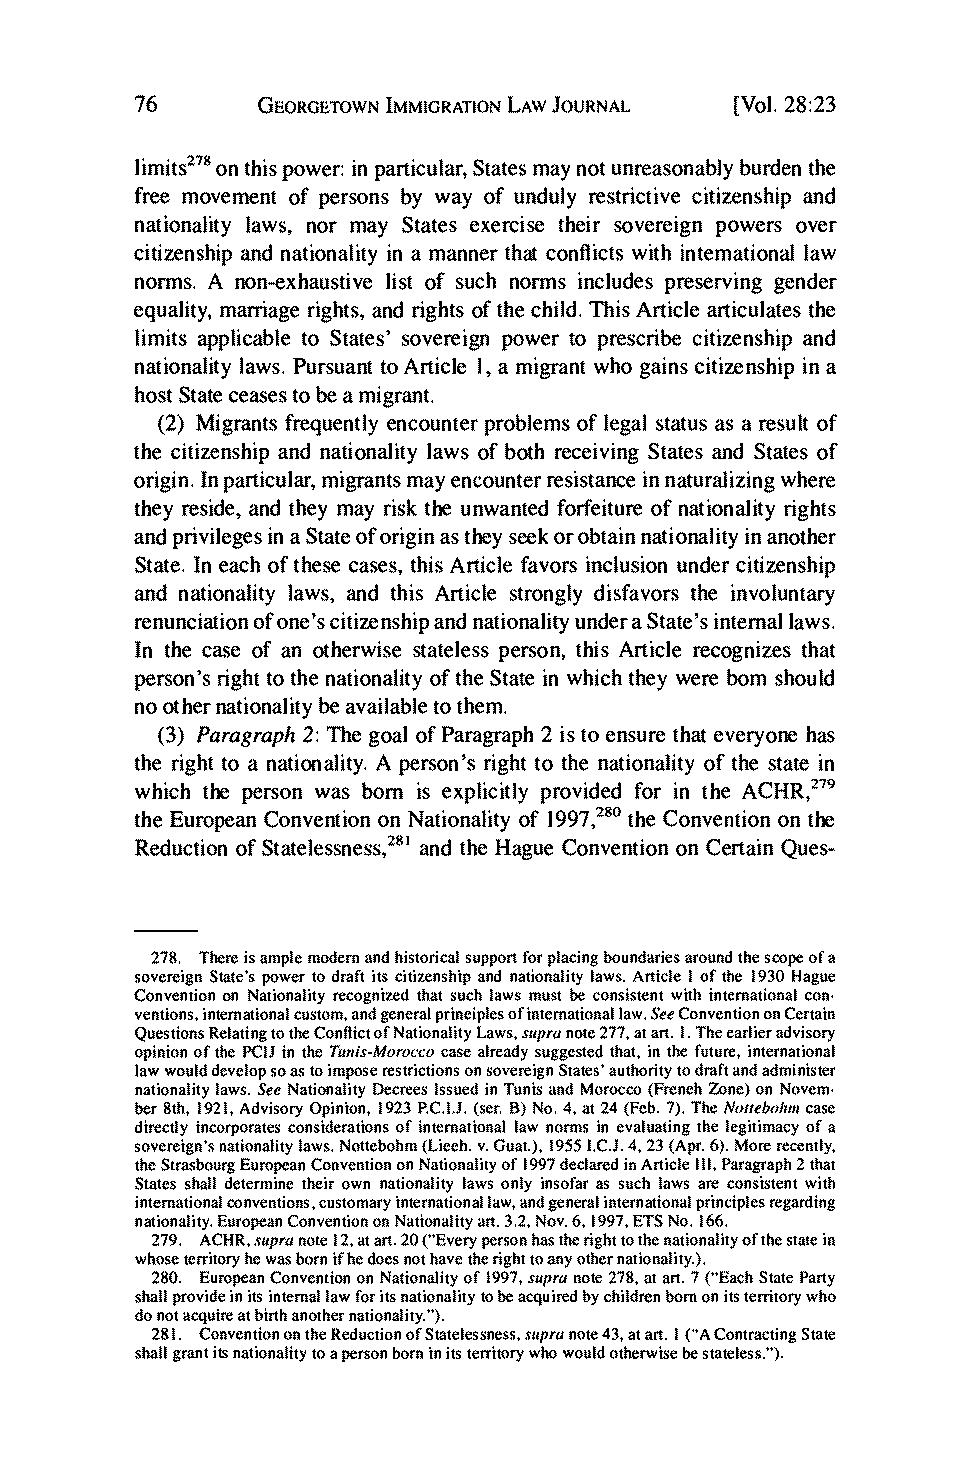 76 GEORGETOWN IMMIGRATION LAW JOURNAL [Vol.